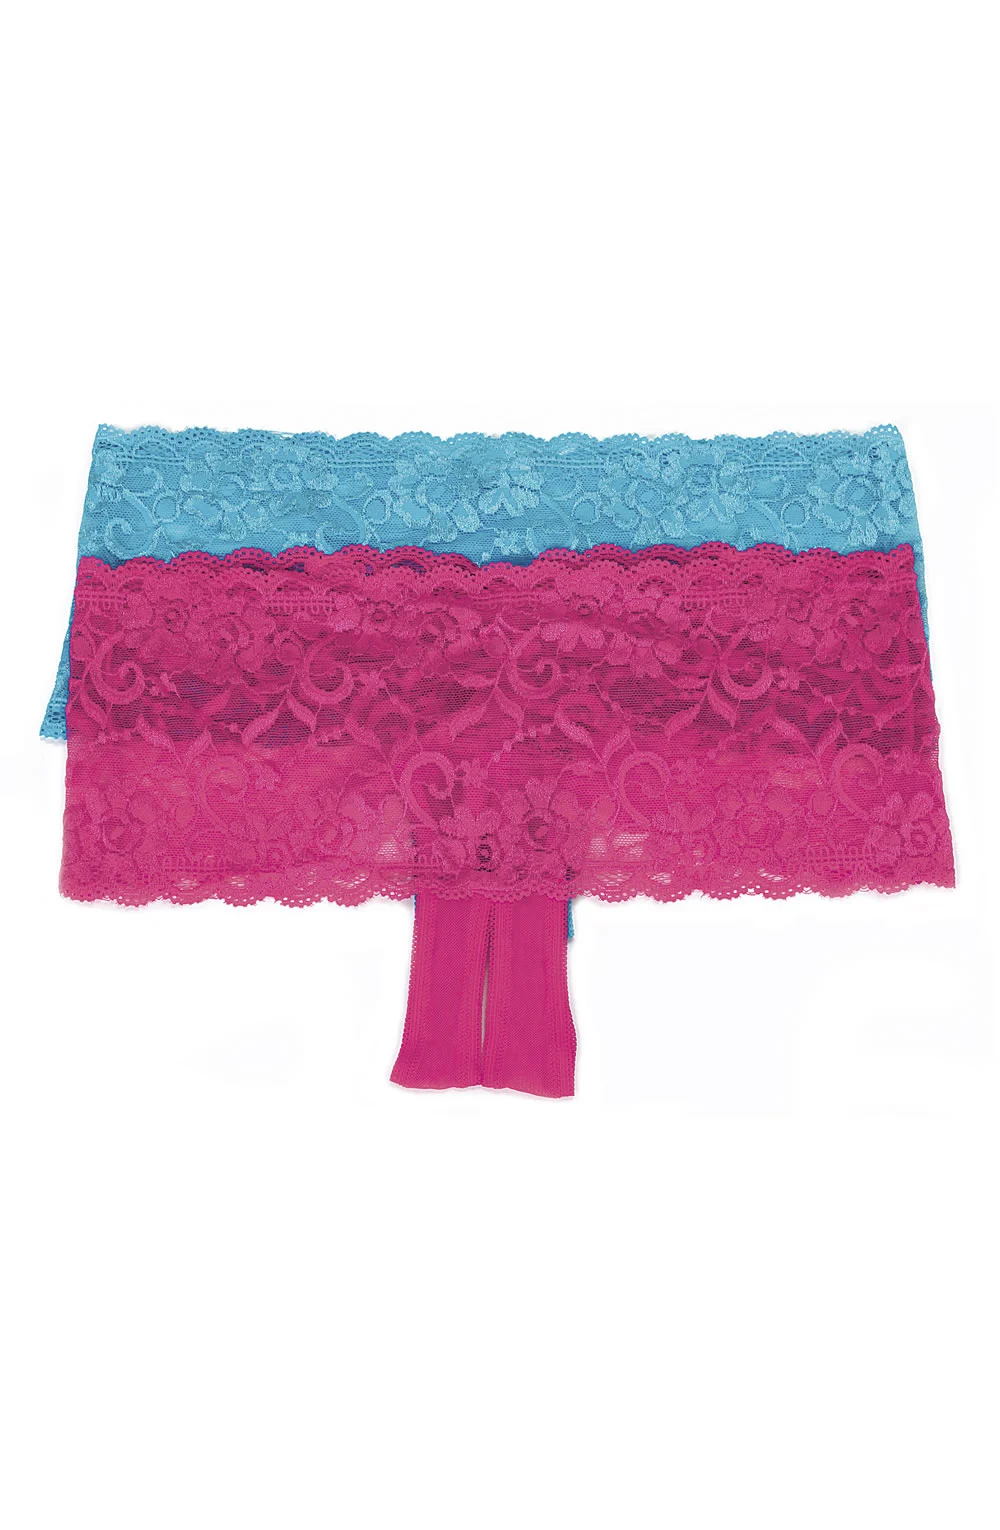 Shirley of Hollywood 59 Turquoise Lace Boy Short - Sexy and Stretchy